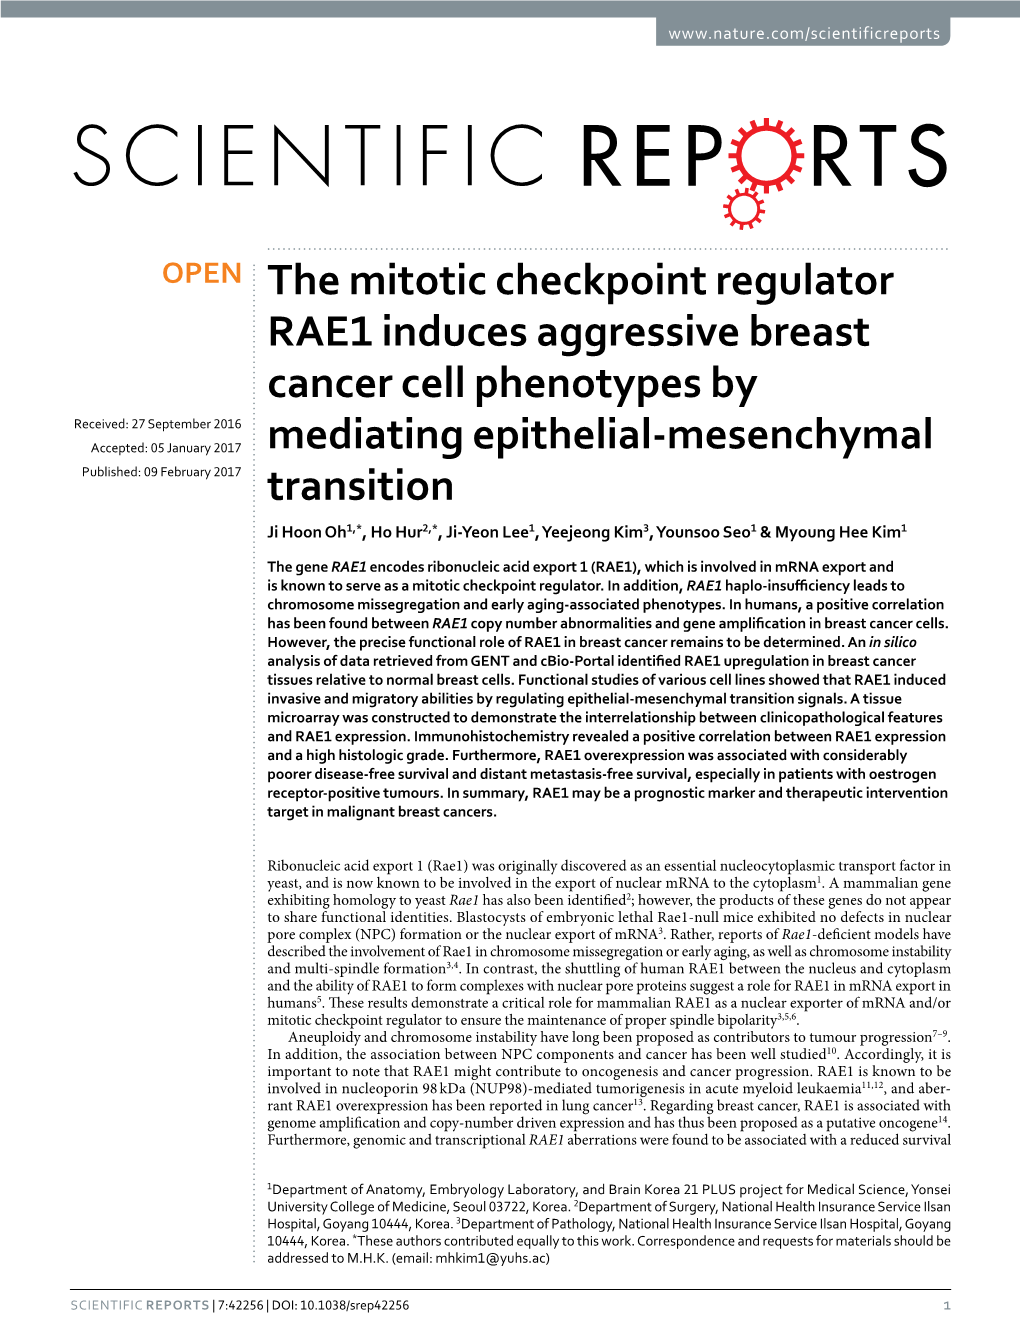 The Mitotic Checkpoint Regulator RAE1 Induces Aggressive